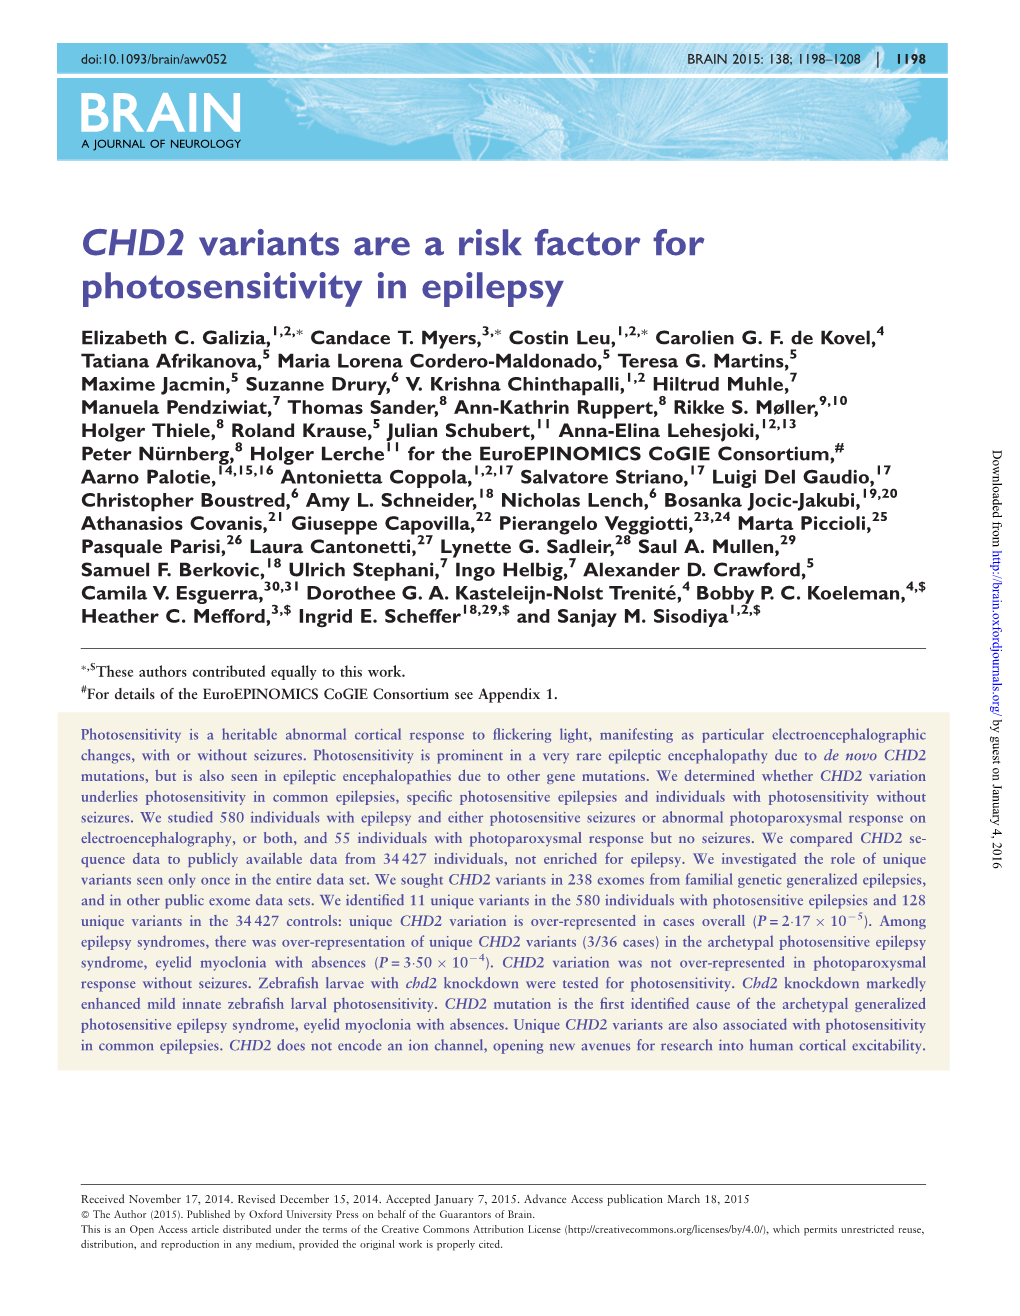 CHD2 Variants Are a Risk Factor for Photosensitivity in Epilepsy